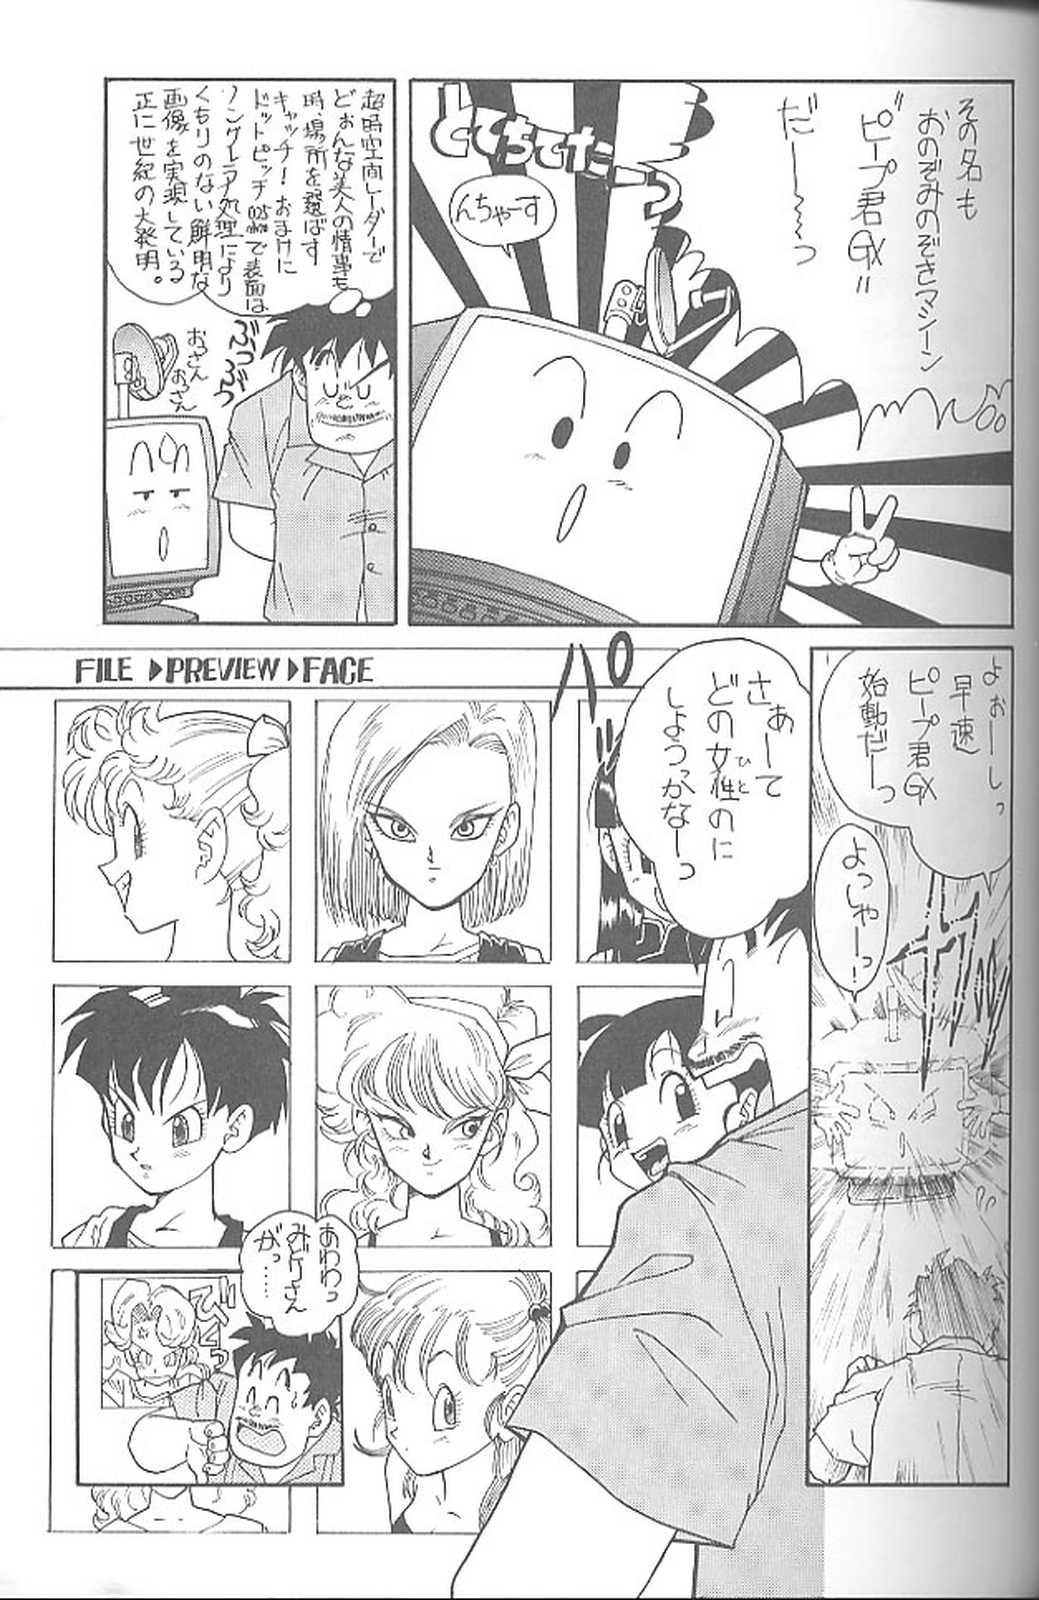 Dancing Haraharatokei vol.4 - Dragon ball z Slayers Dirty pair Ghost sweeper mikami World masterpiece theater Dr. slump Tico of the seven seas Self - Page 6